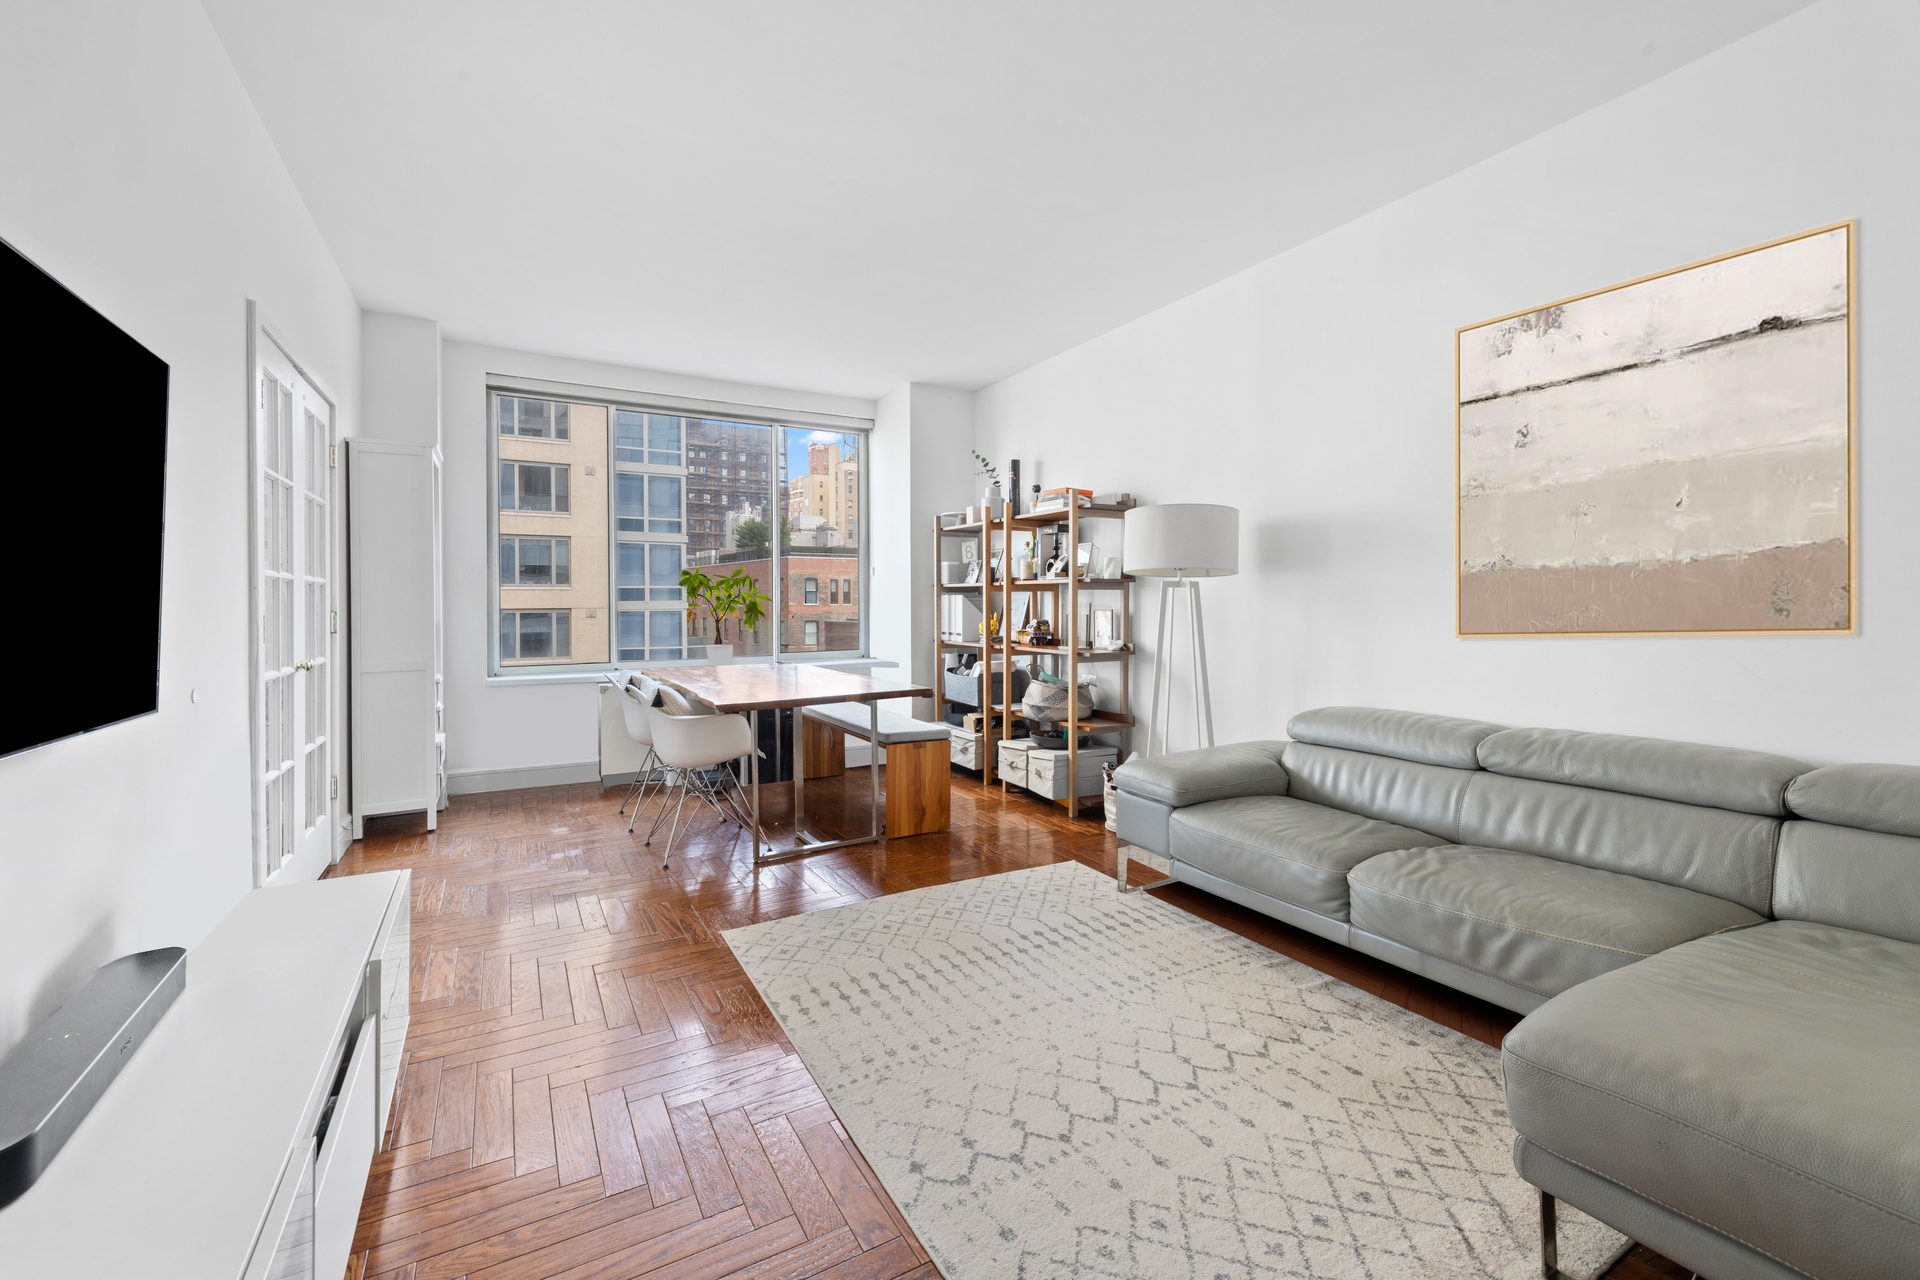 200 Riverside Boulevard 8-C, Lincoln Square, Upper West Side, NYC - 2 Bedrooms  
1.5 Bathrooms  
5 Rooms - 